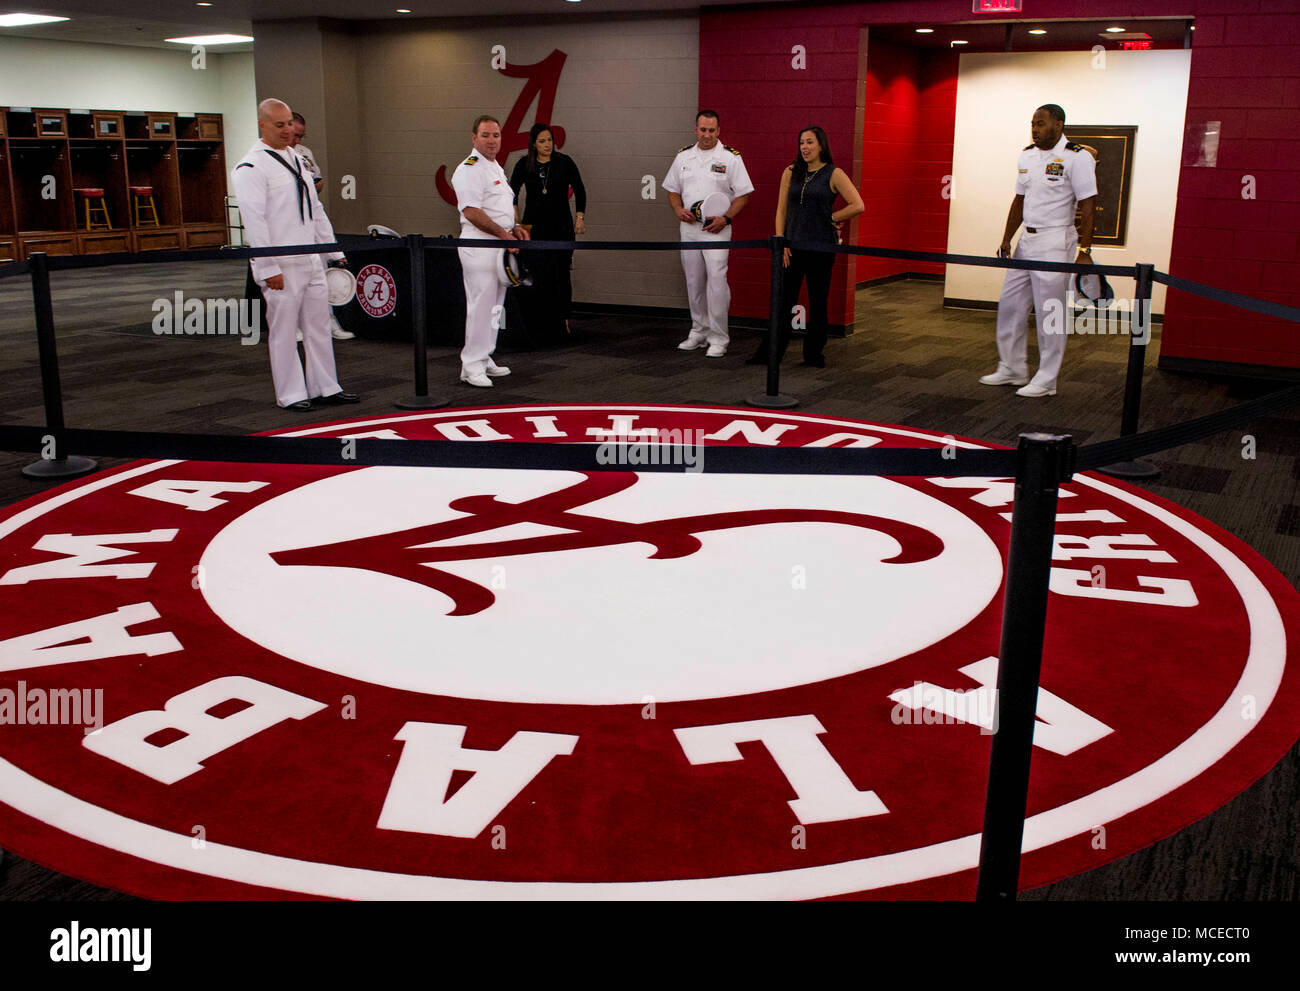 180411-N-MJ645-0193 TUSCALOOSA, Ala. (April 11, 2018) Sailors participate in a tour of the University of Alabama football locker room at Bryant-Denny Stadium as part of Navy Week Birmingham. The Navy Office of Community Outreach uses the Navy Week program to bring Navy Sailors, equipment and displays to approximately 14 American cities each year for a weeklong schedule of outreach engagements. (U.S. Navy photo by Mass Communication Specialist 1st Class Marcus L. Stanley/Released) Stock Photo